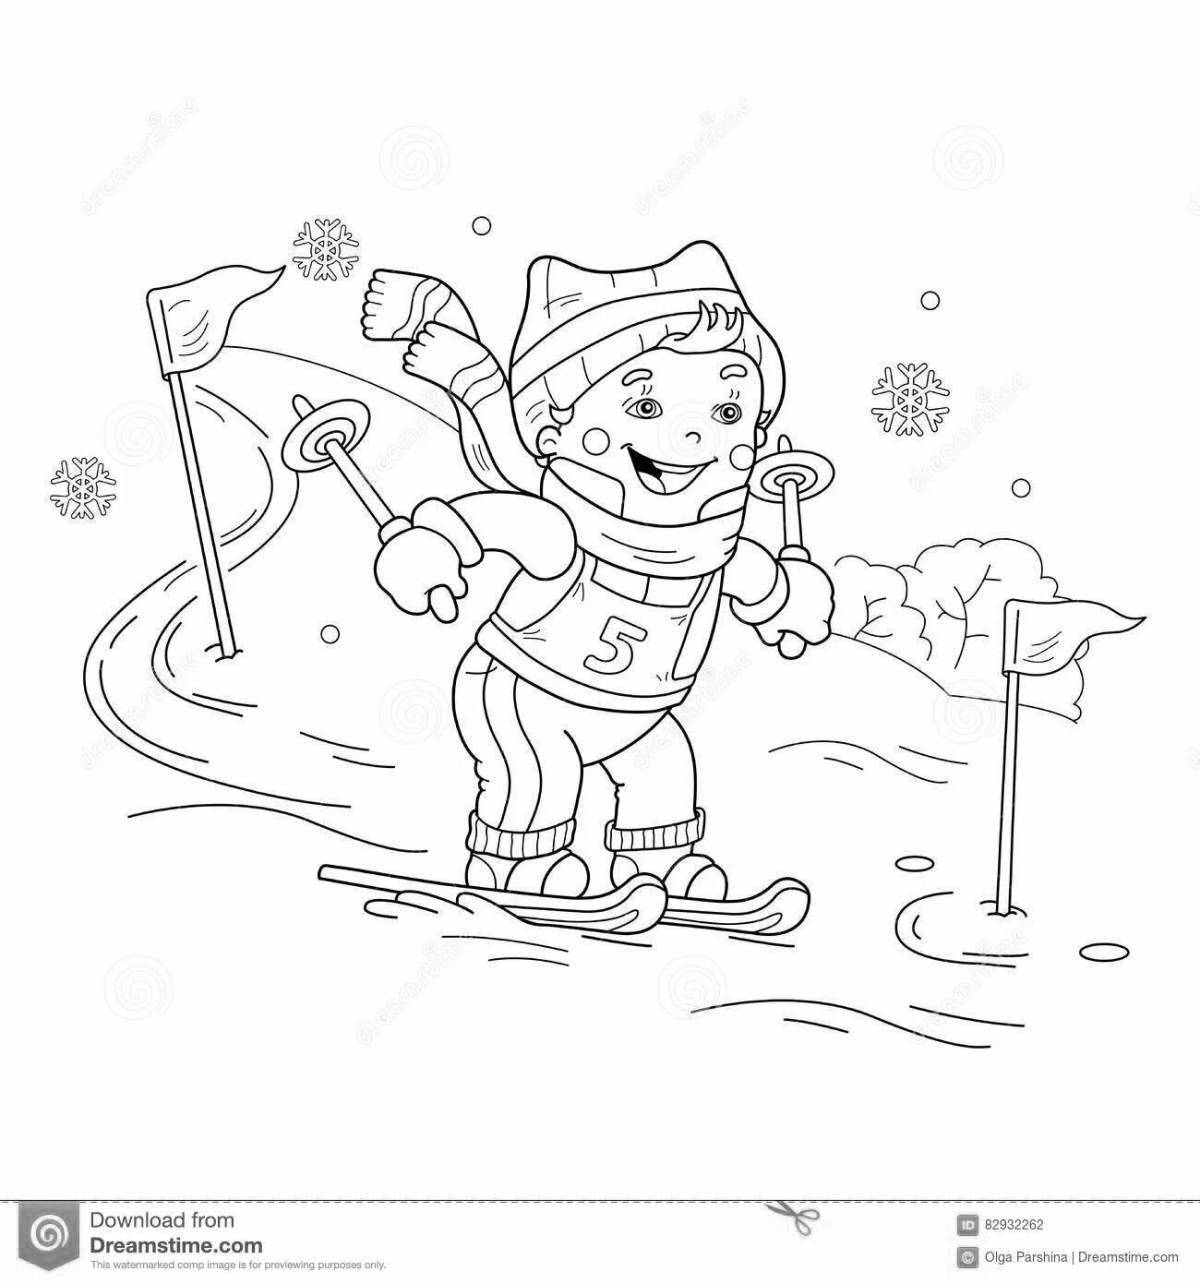 Coloring book bright boy on skis